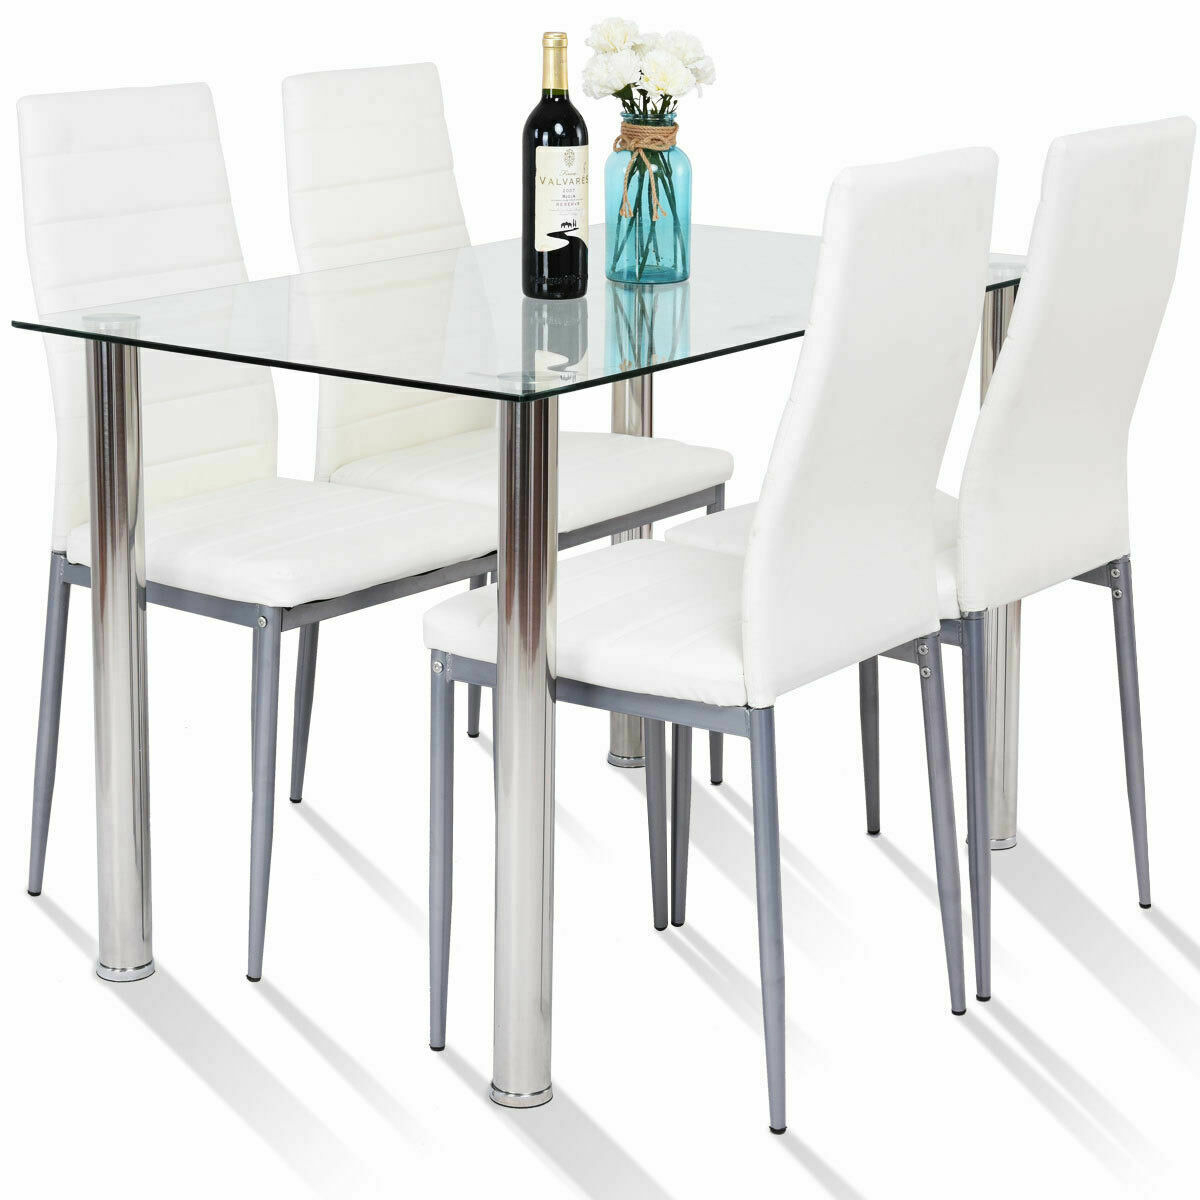 White Dining Table Set Visualhunt, Dining Room Set With White Chairs